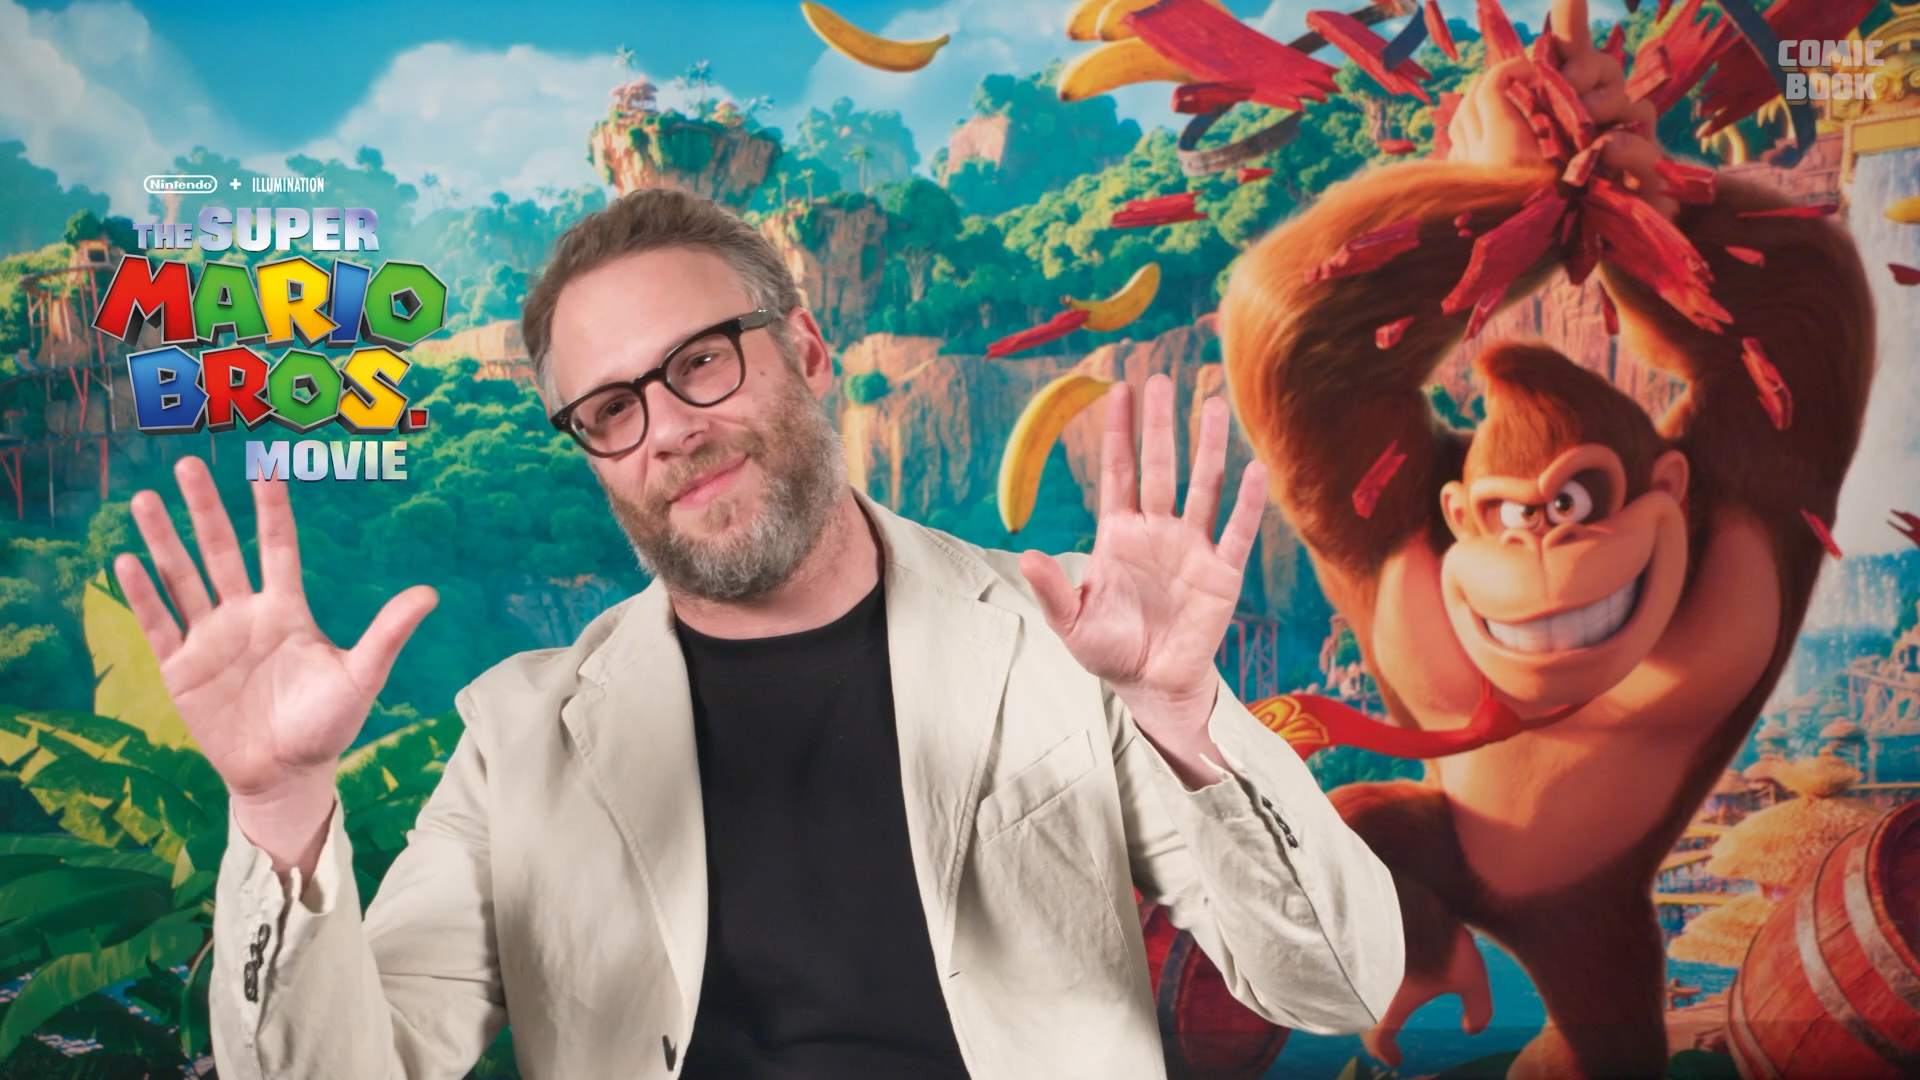 We can never have boring scenes'': Seth Rogen opens up on Teenage